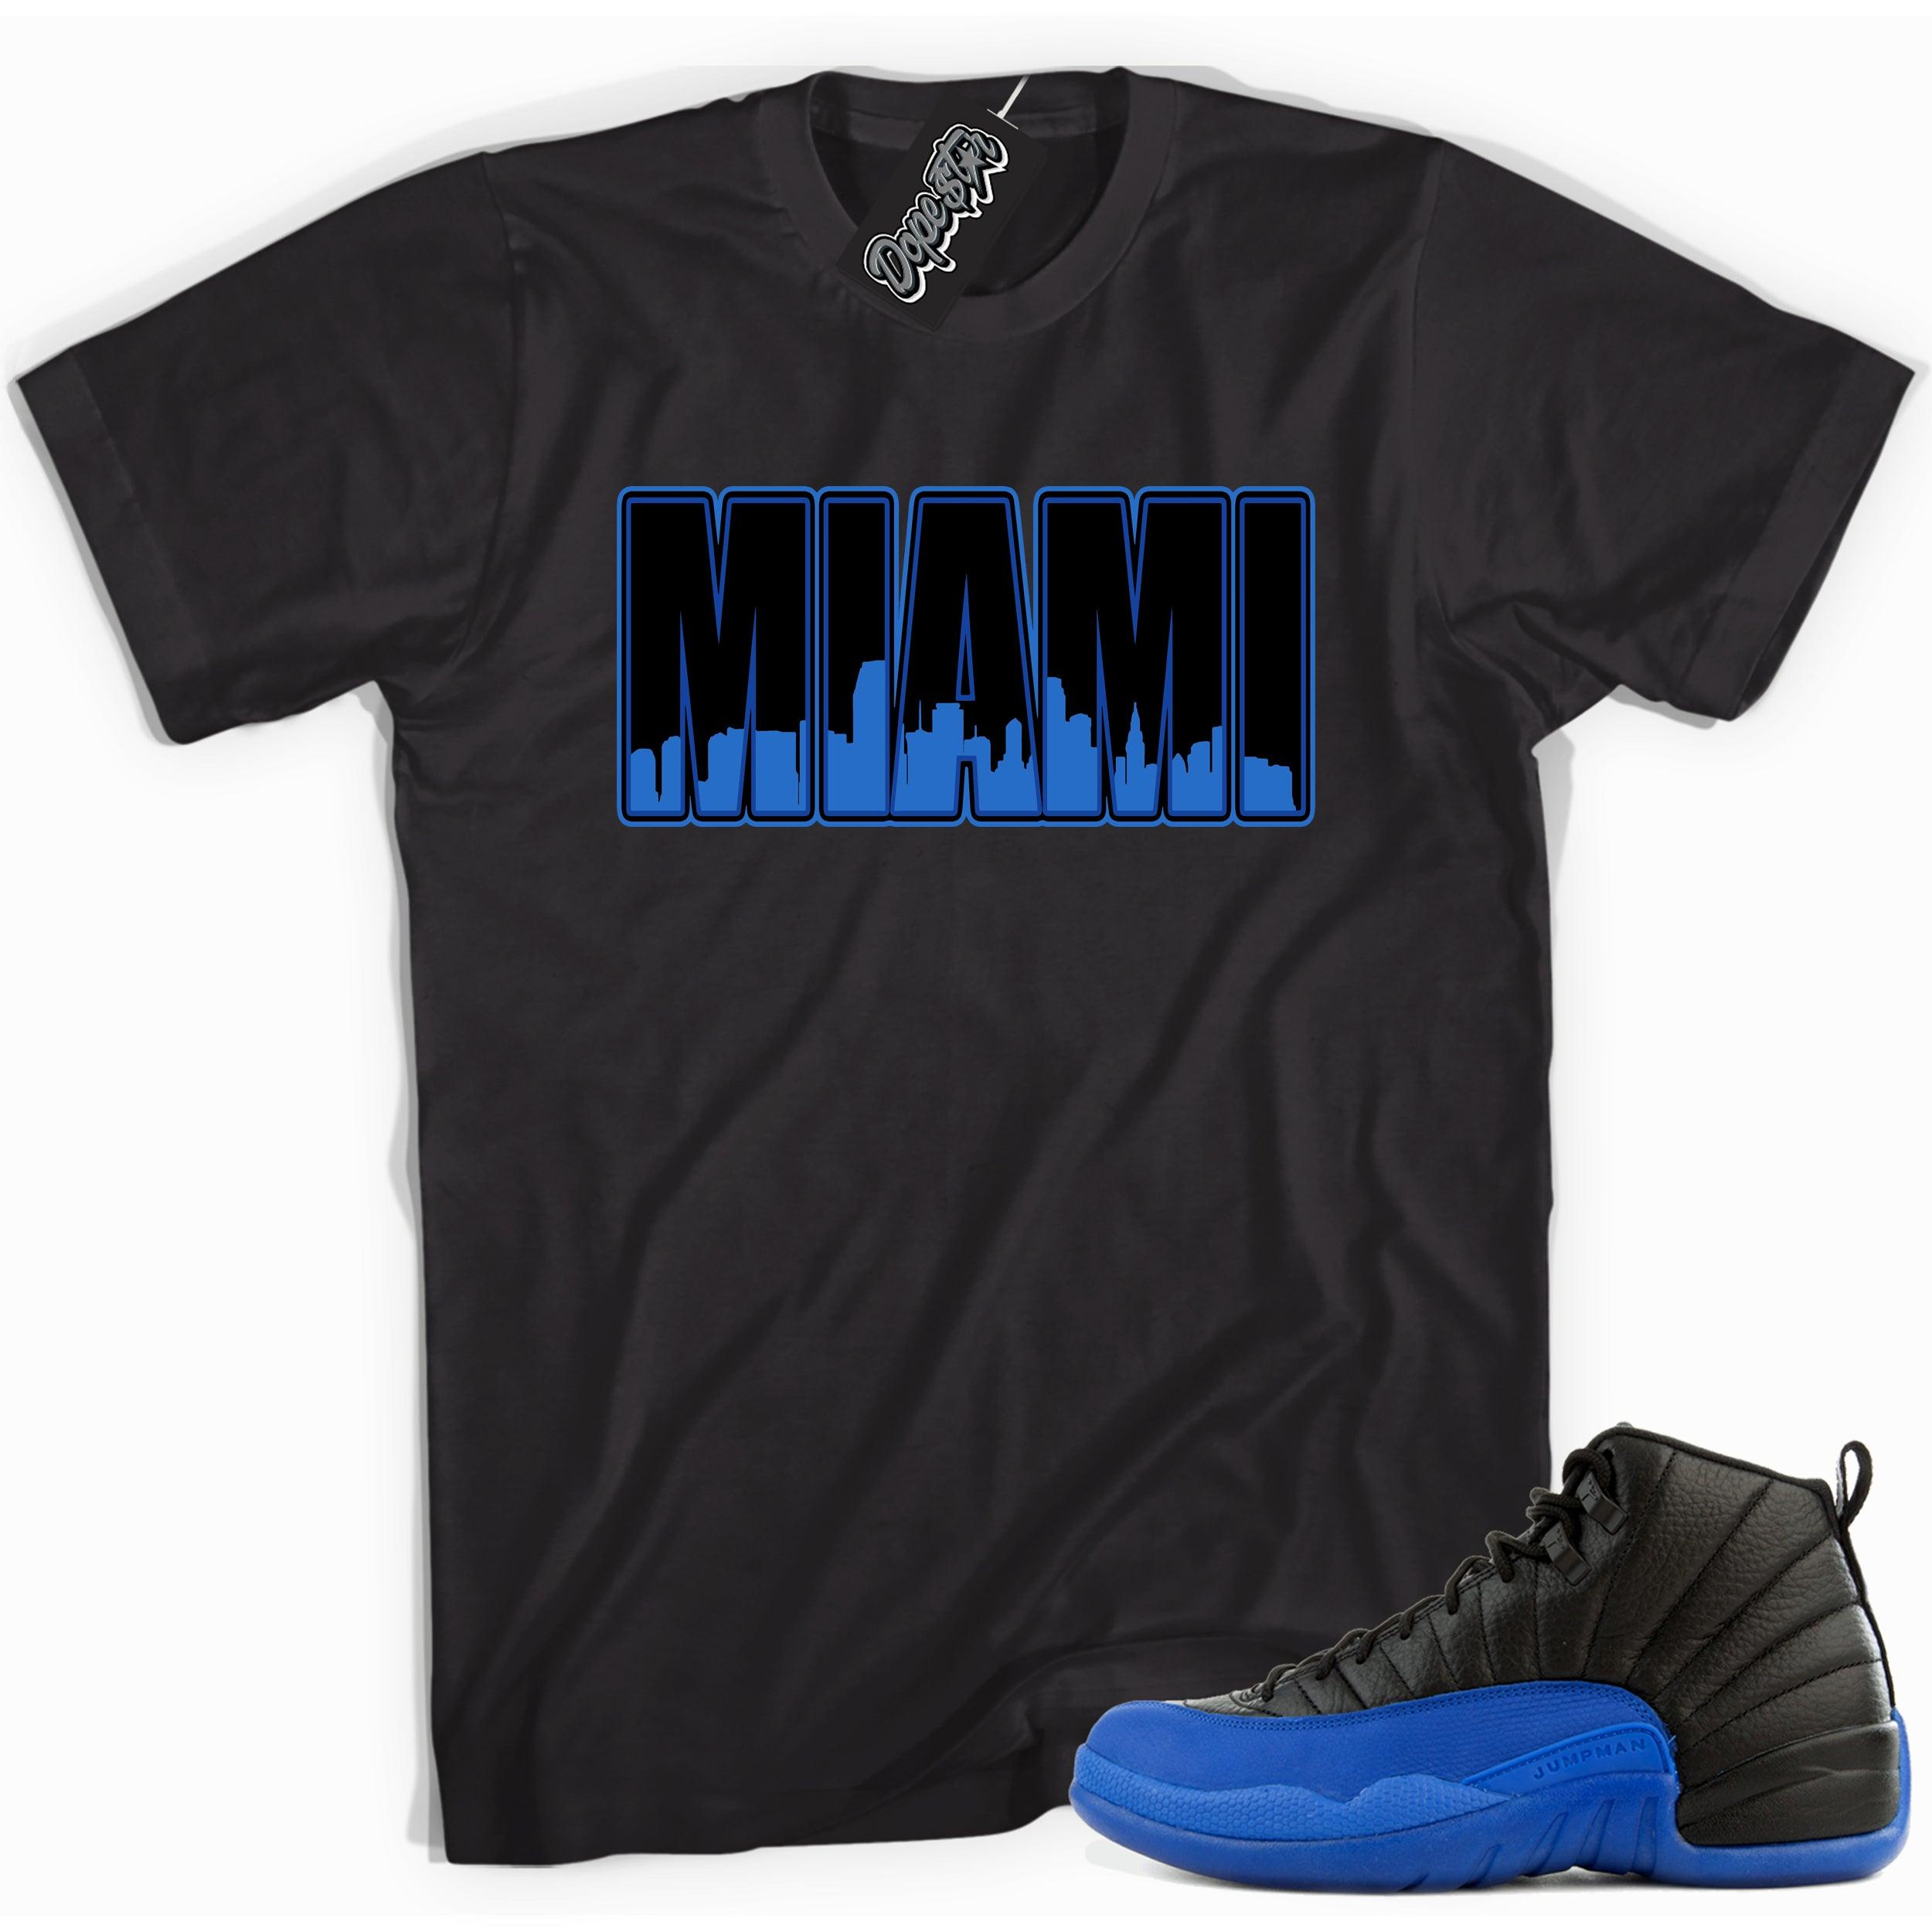 Cool black graphic tee with 'miami' print, that perfectly matches  Air Jordan 12 Retro Black Game Royal sneakers.